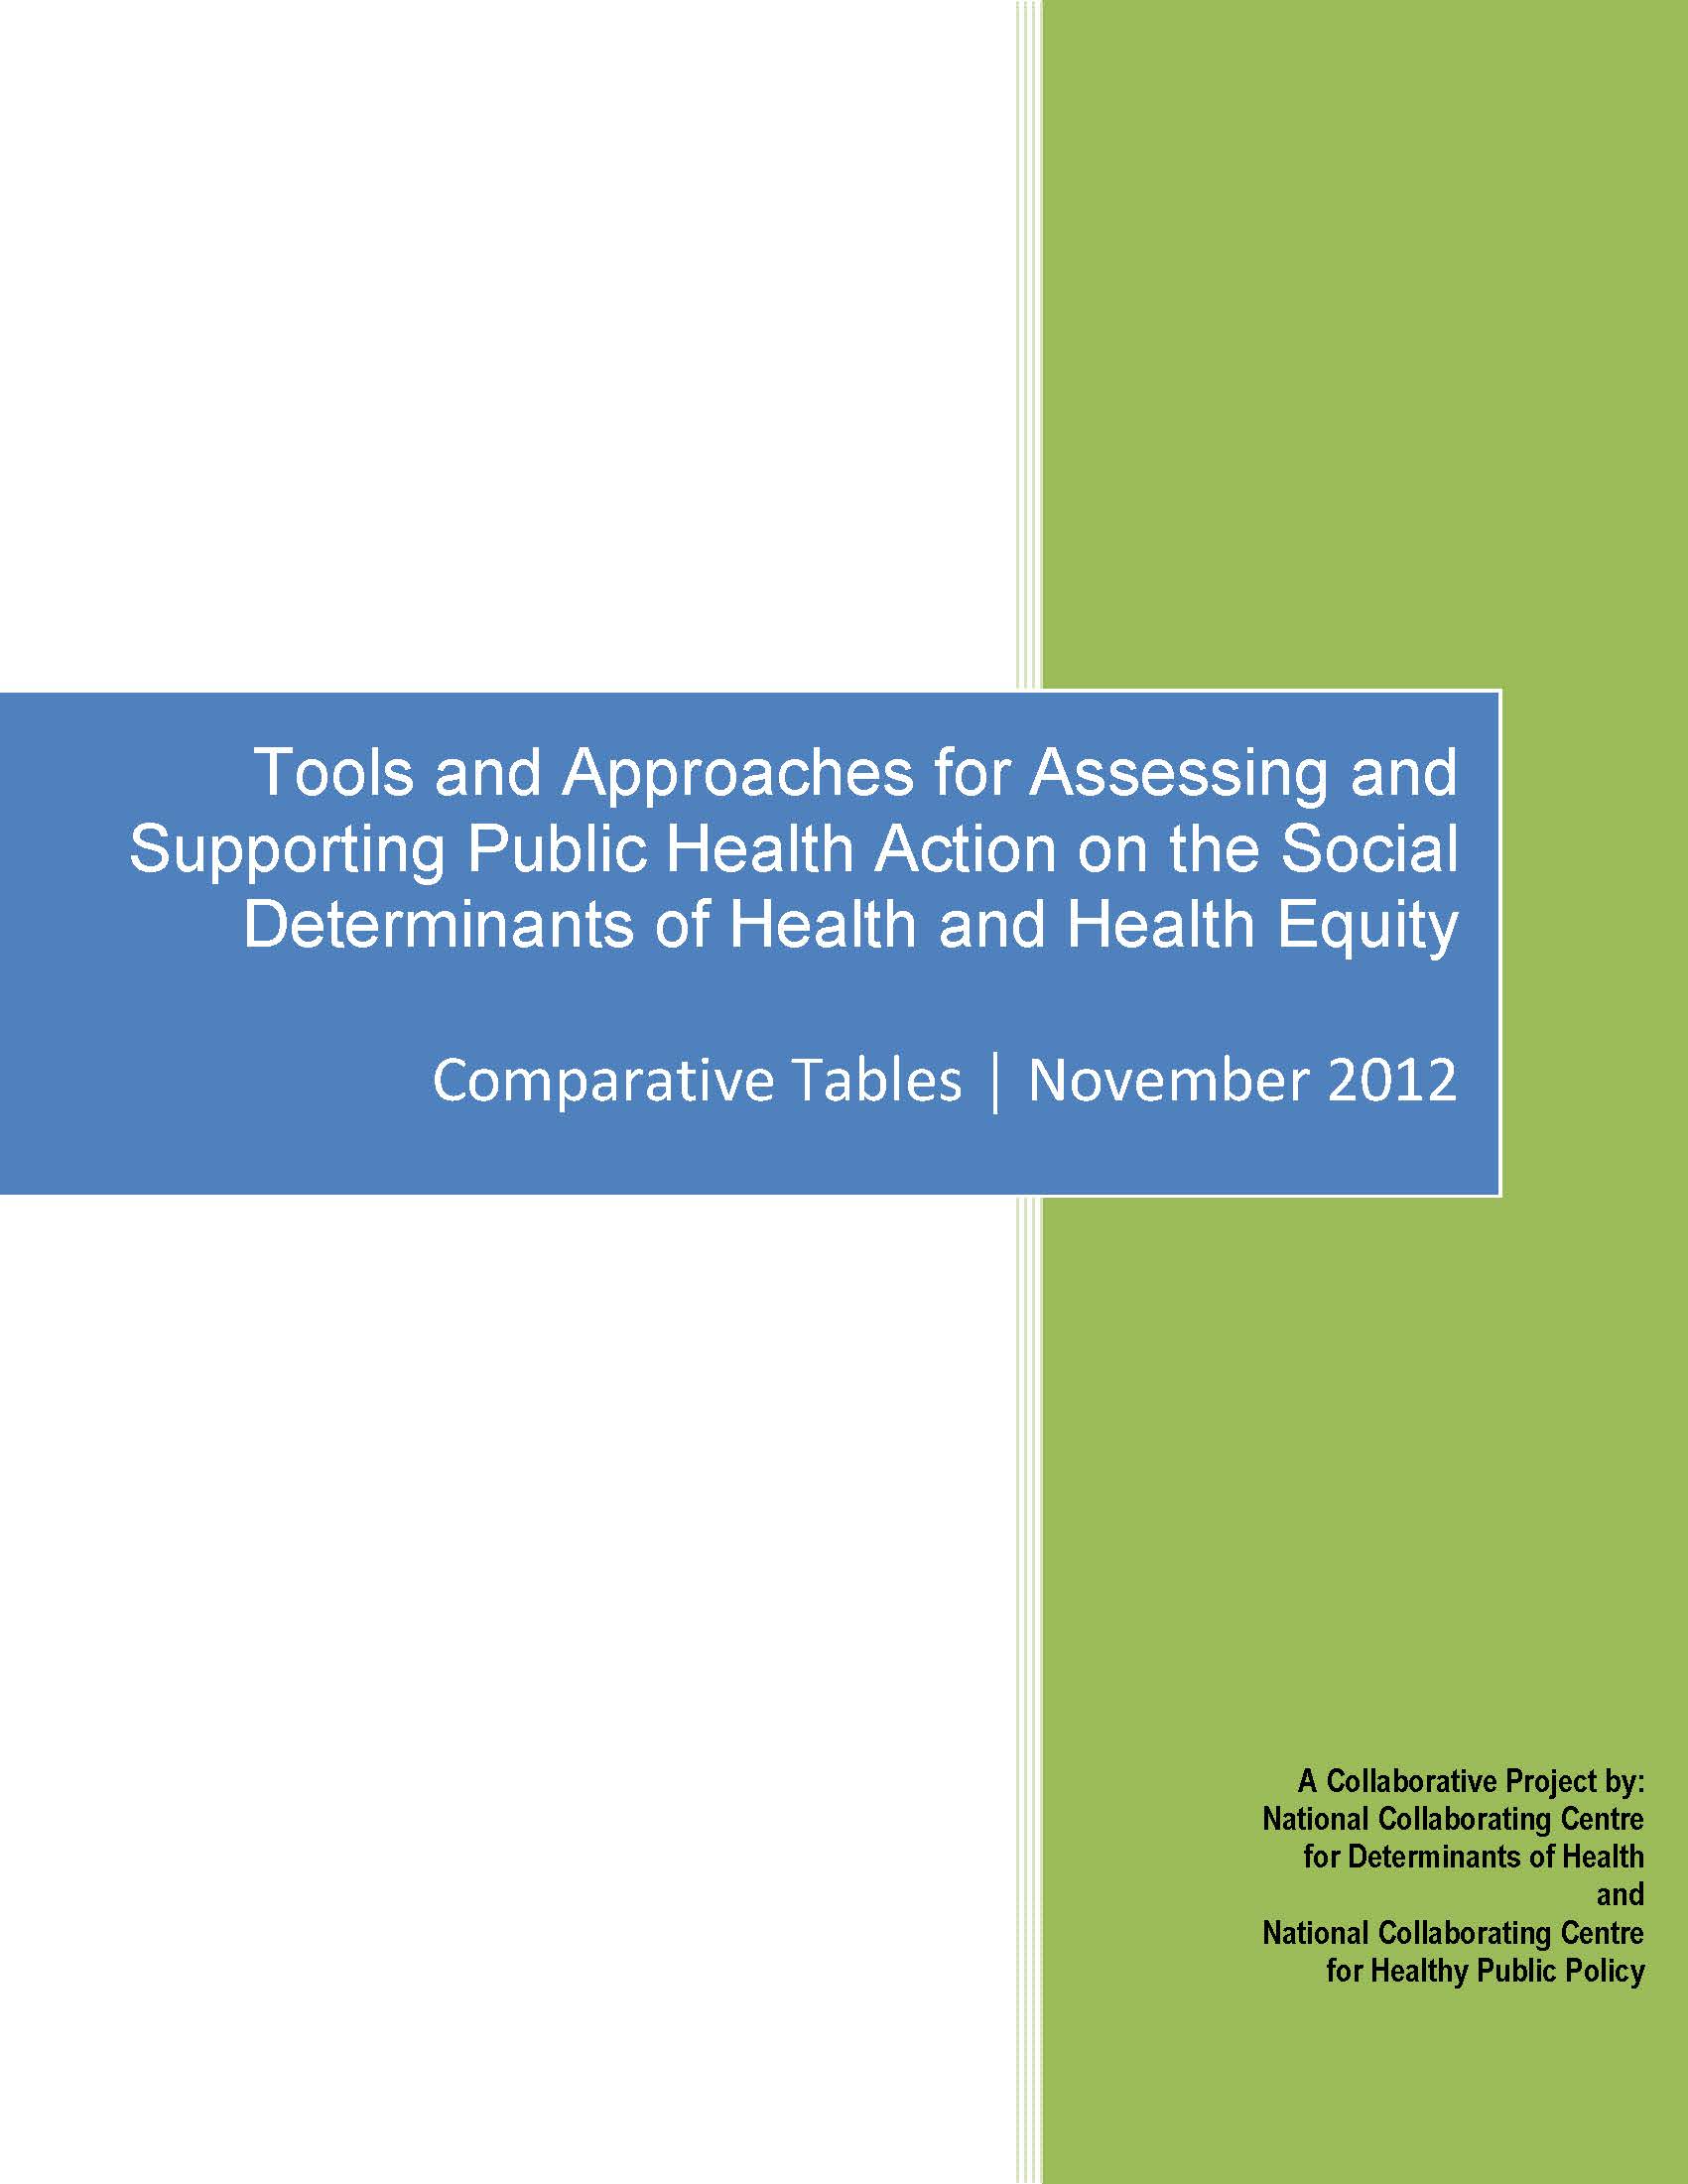 Tools and Approaches for Assessing and Supporting Public Health Action on the Social Determinants of Health and Health Equity